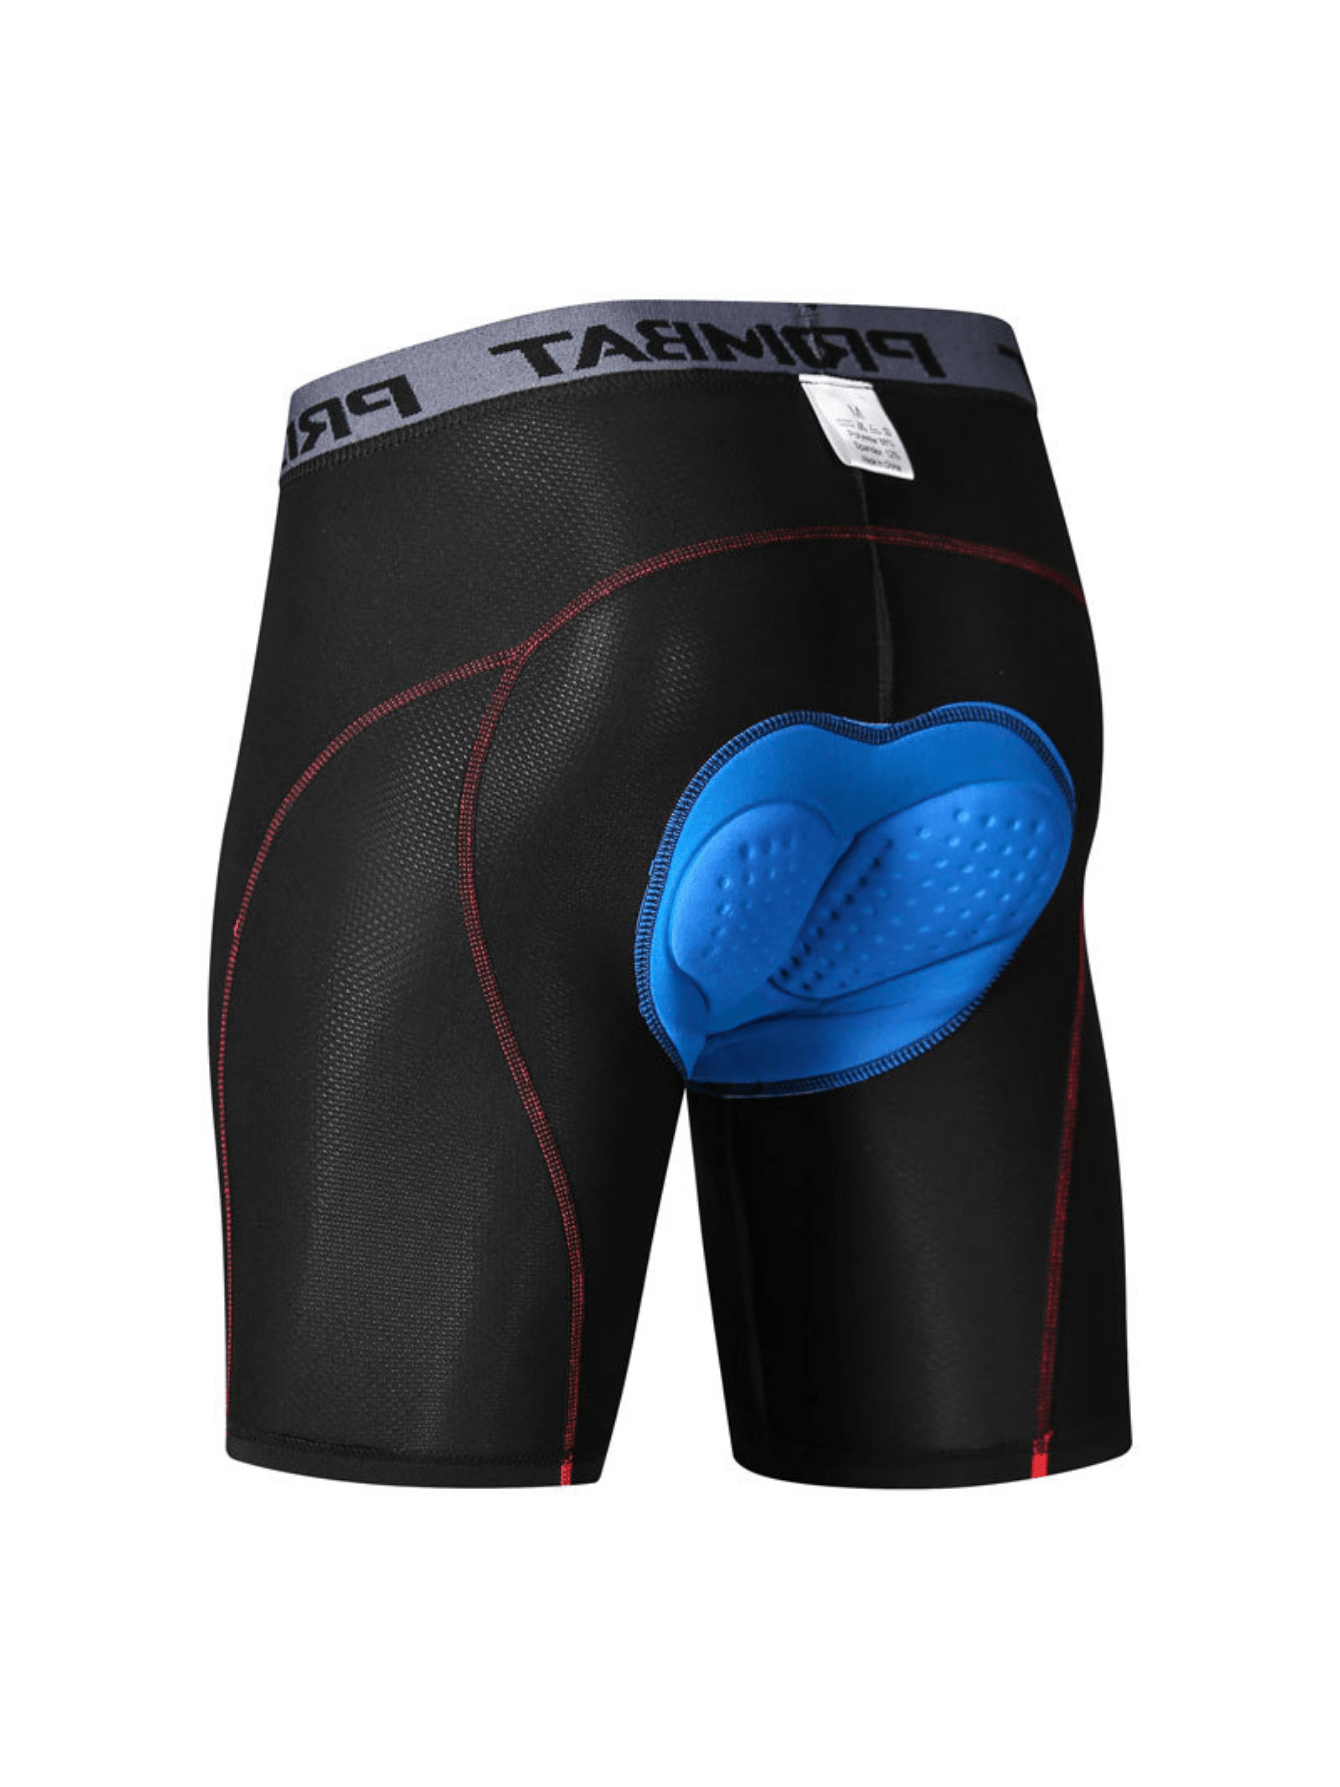 New Padded Cycling Shorts Underwear